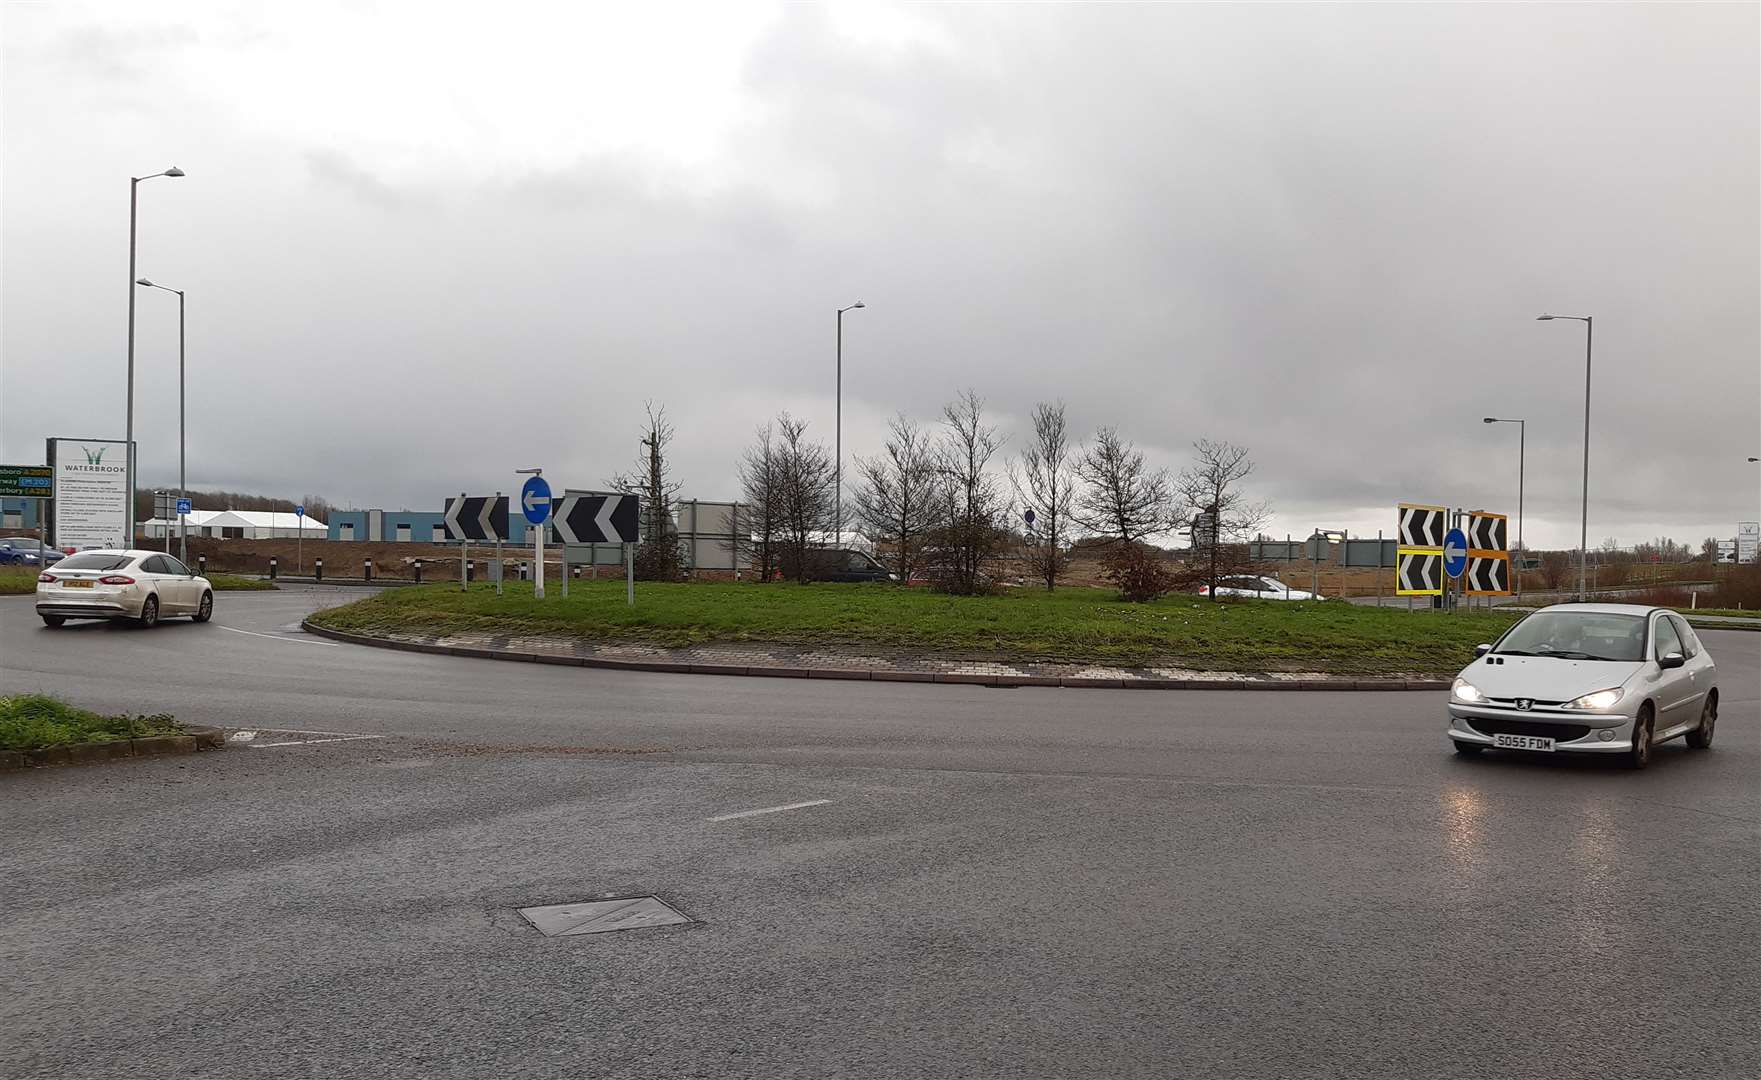 Traffic lights will replace the Orbital Park roundabout on the A2070